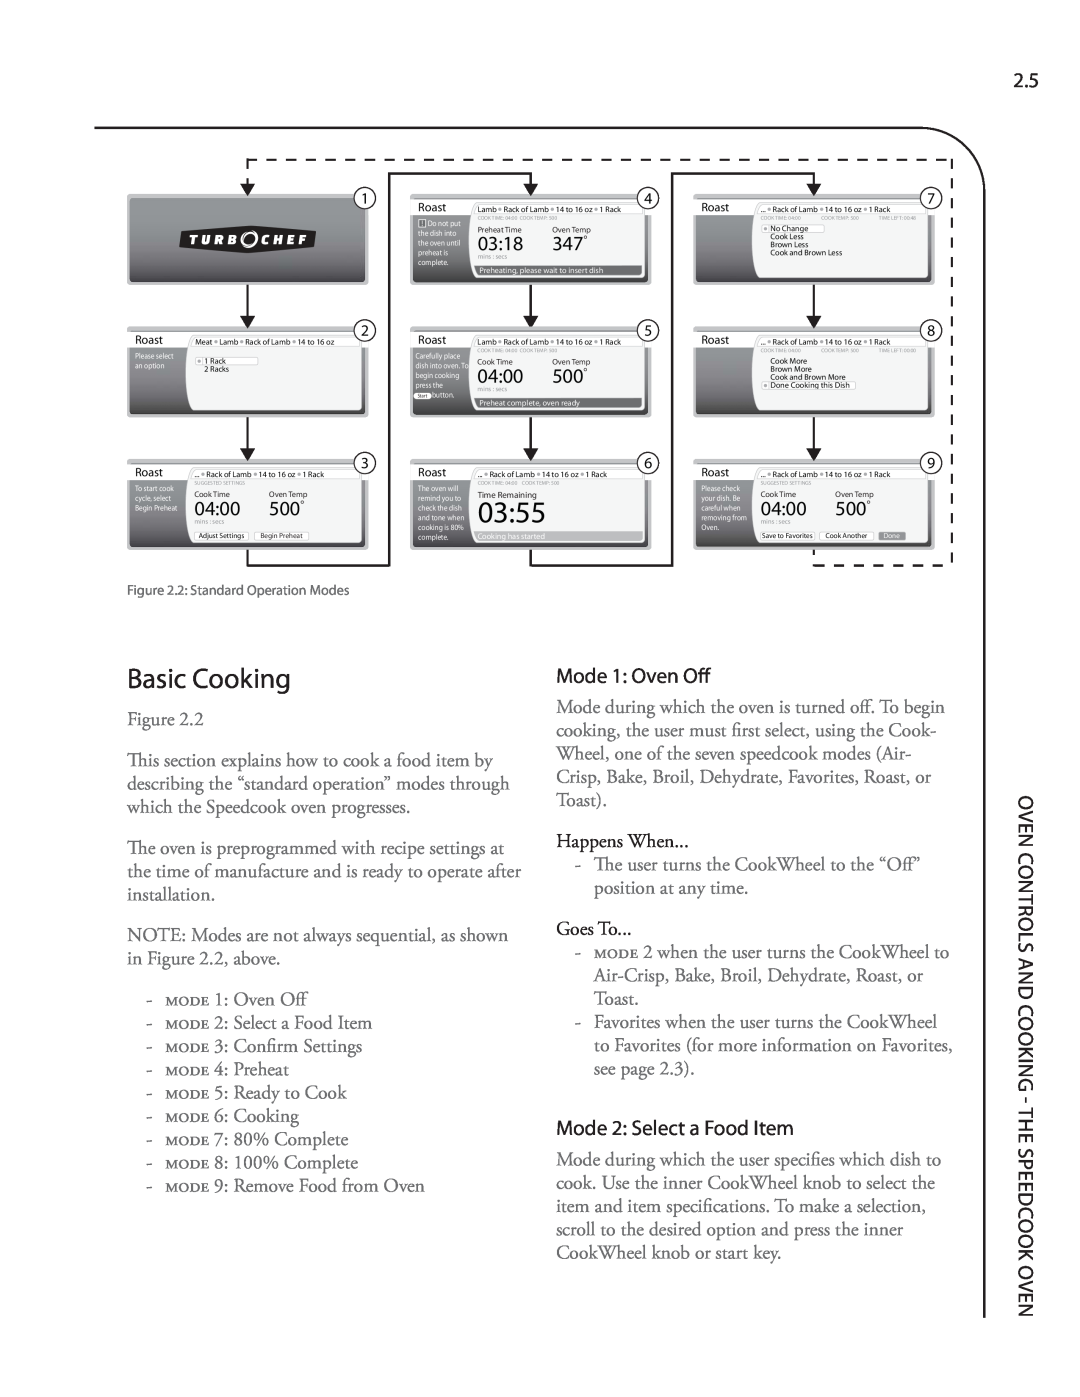 Turbo Chef Technologies Residential Single and Double Wall Oven Basic Cooking, Mode 1 Oven Off, Mode 2 Select a Food Item 